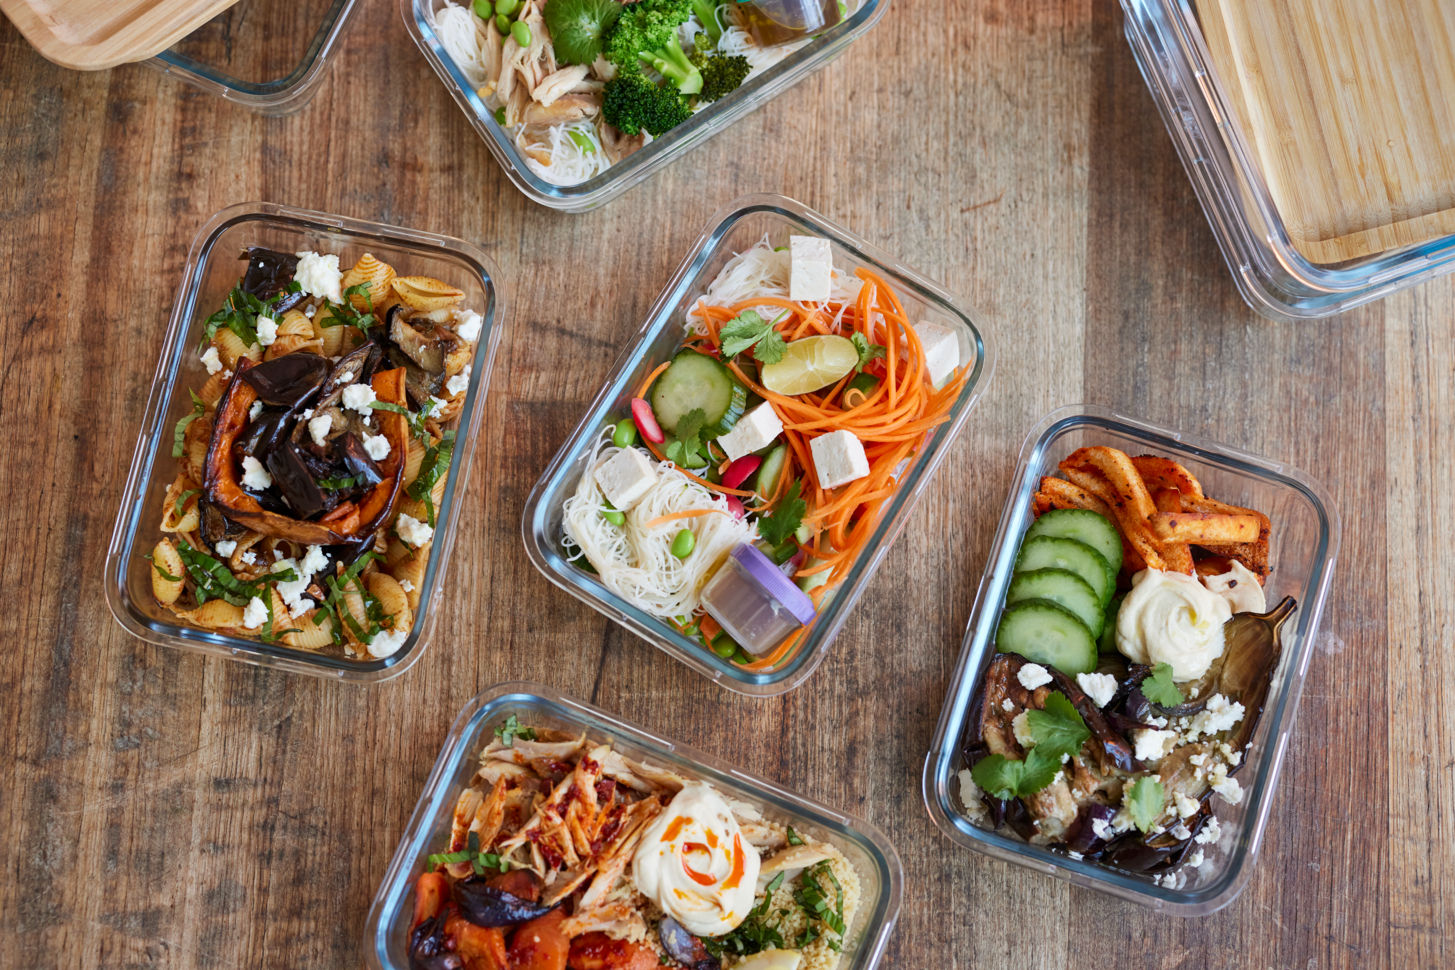 How to meal prep for summer Features Jamie Oliver